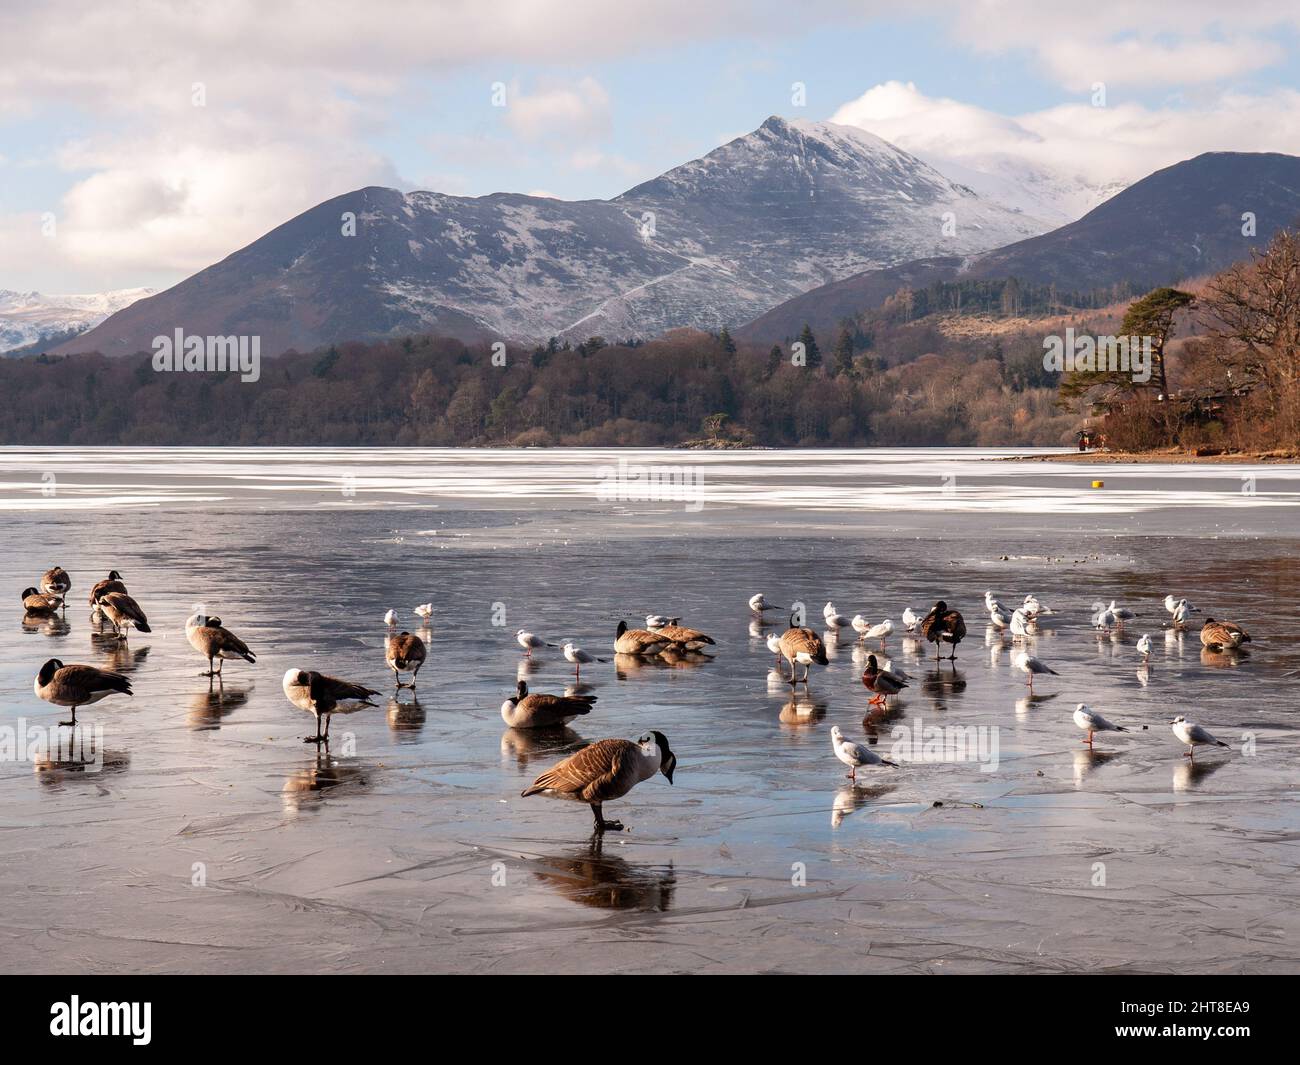 Geese, ducks and gulls walk on the ice of a frozen Derwent Water, with the snow-called mountains of the Derwent Fells behind, during winter in England Stock Photo